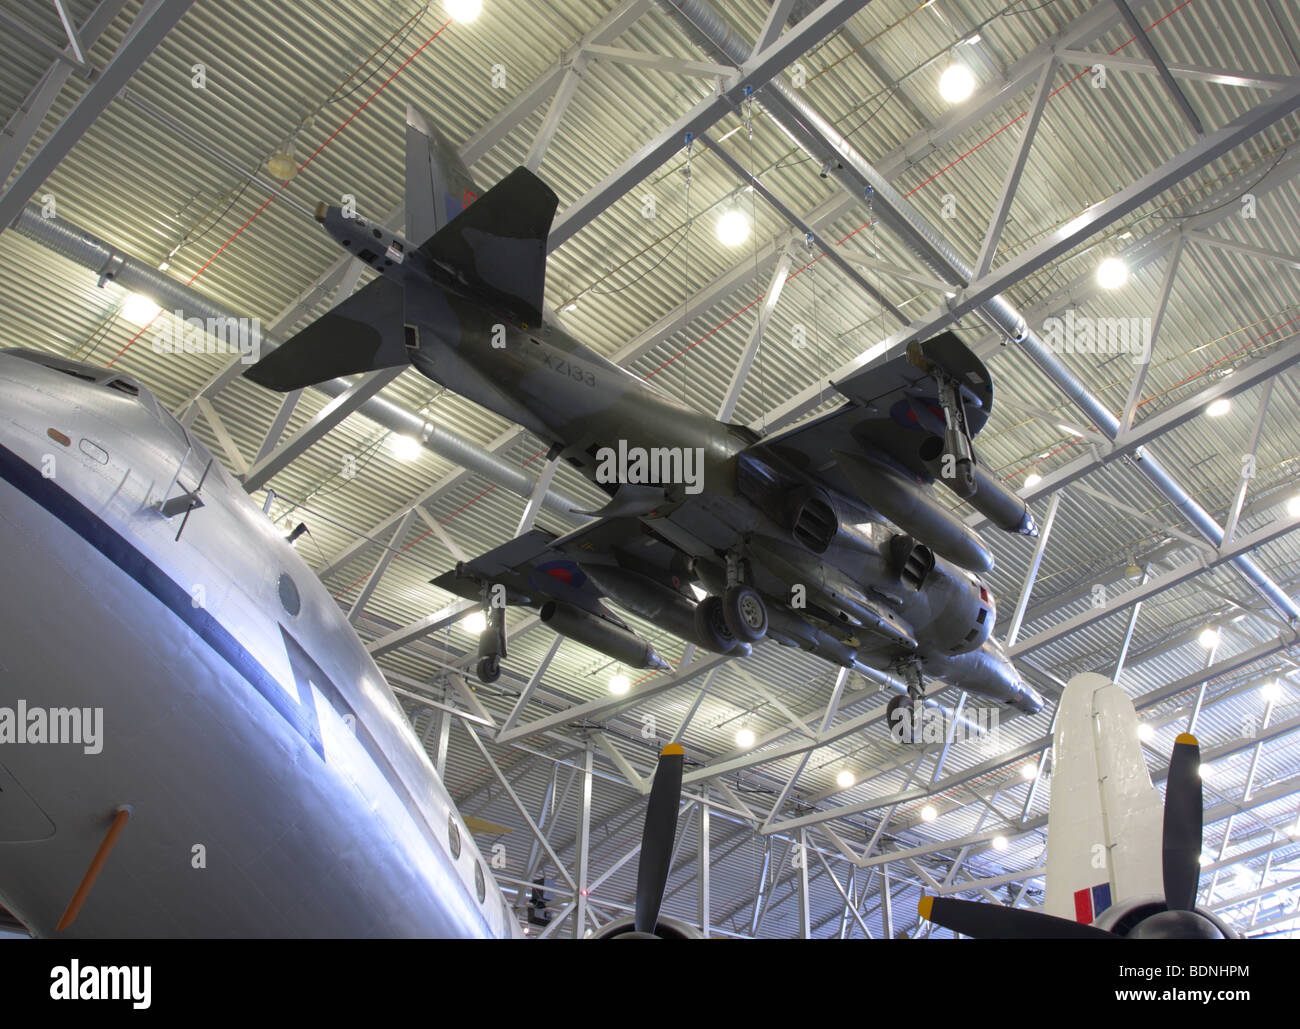 Suspended in the Air Space Hangar roof space is this fine example of the BAe Harrier GR3 jump jet. Stock Photo